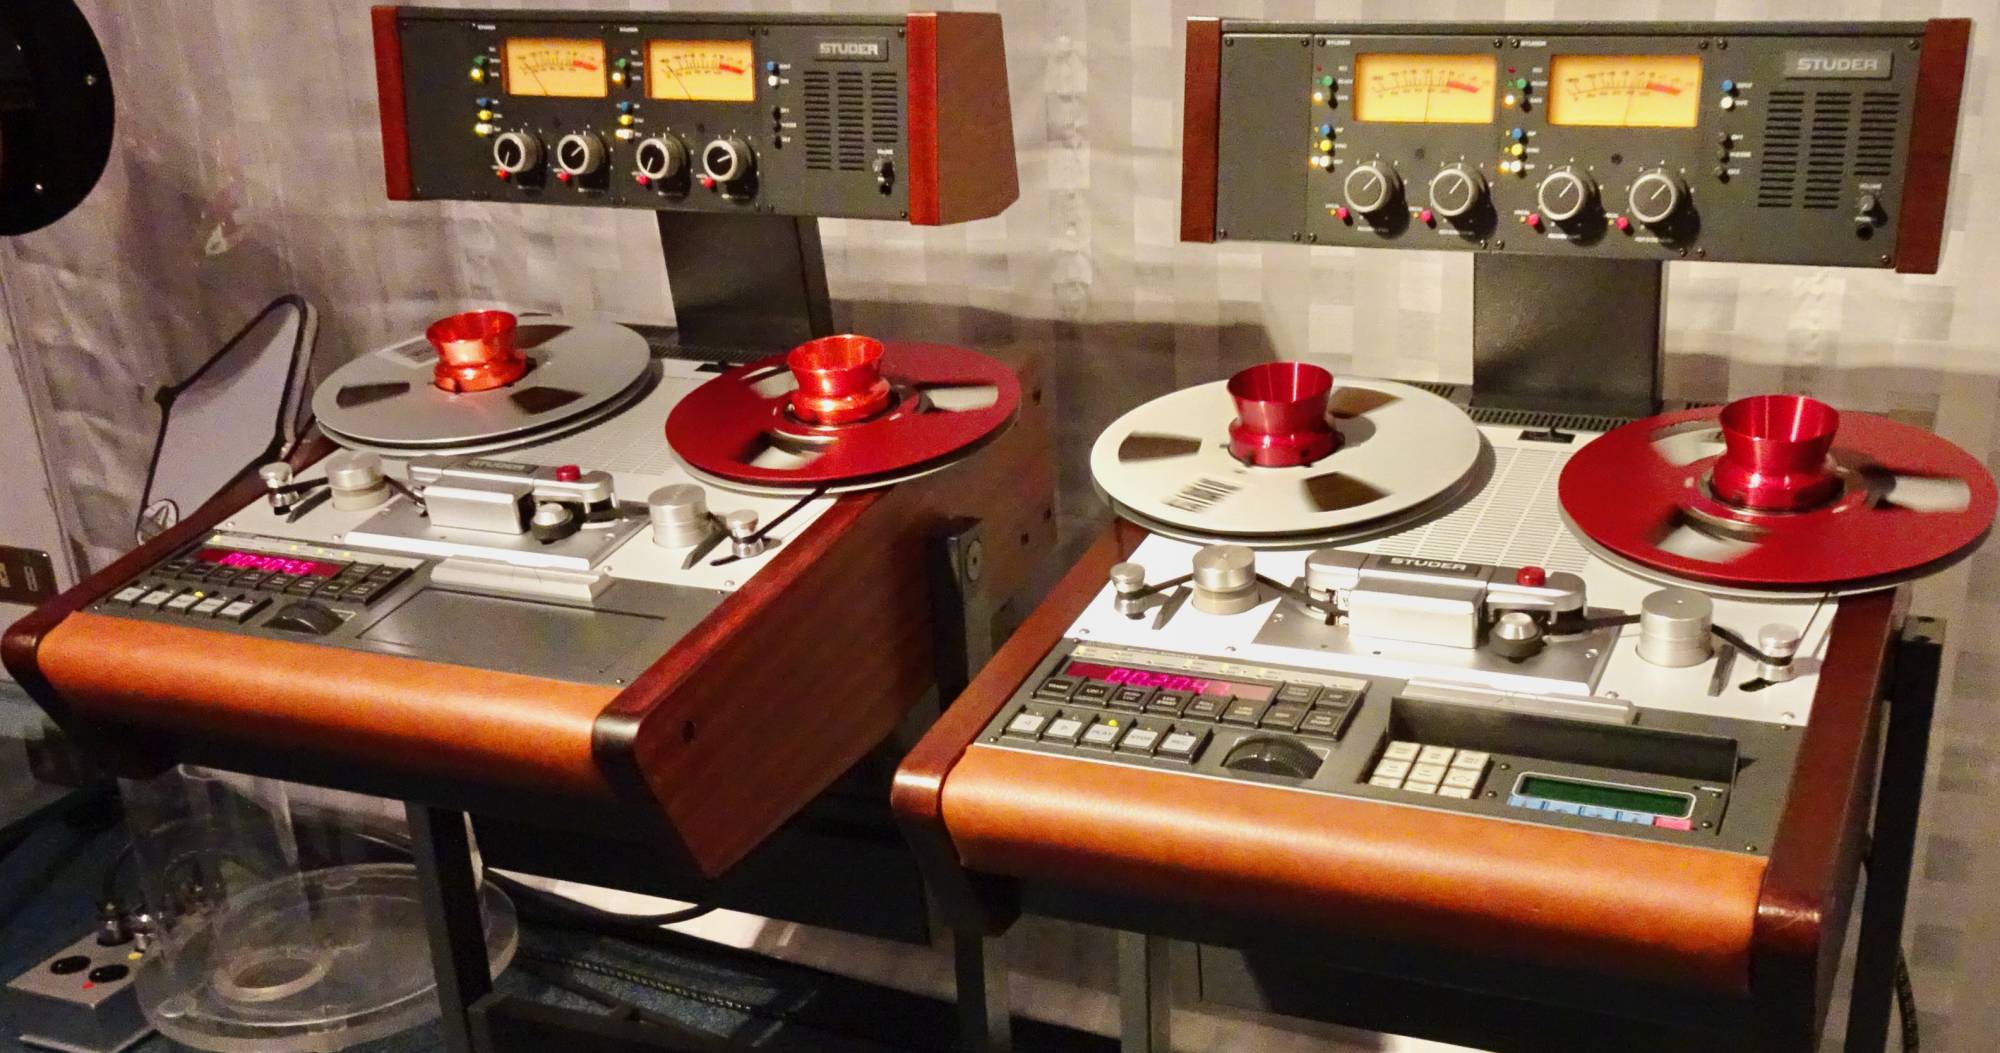 Studer A812 - Professional Reel to Reel Tape Recorder - A stunning